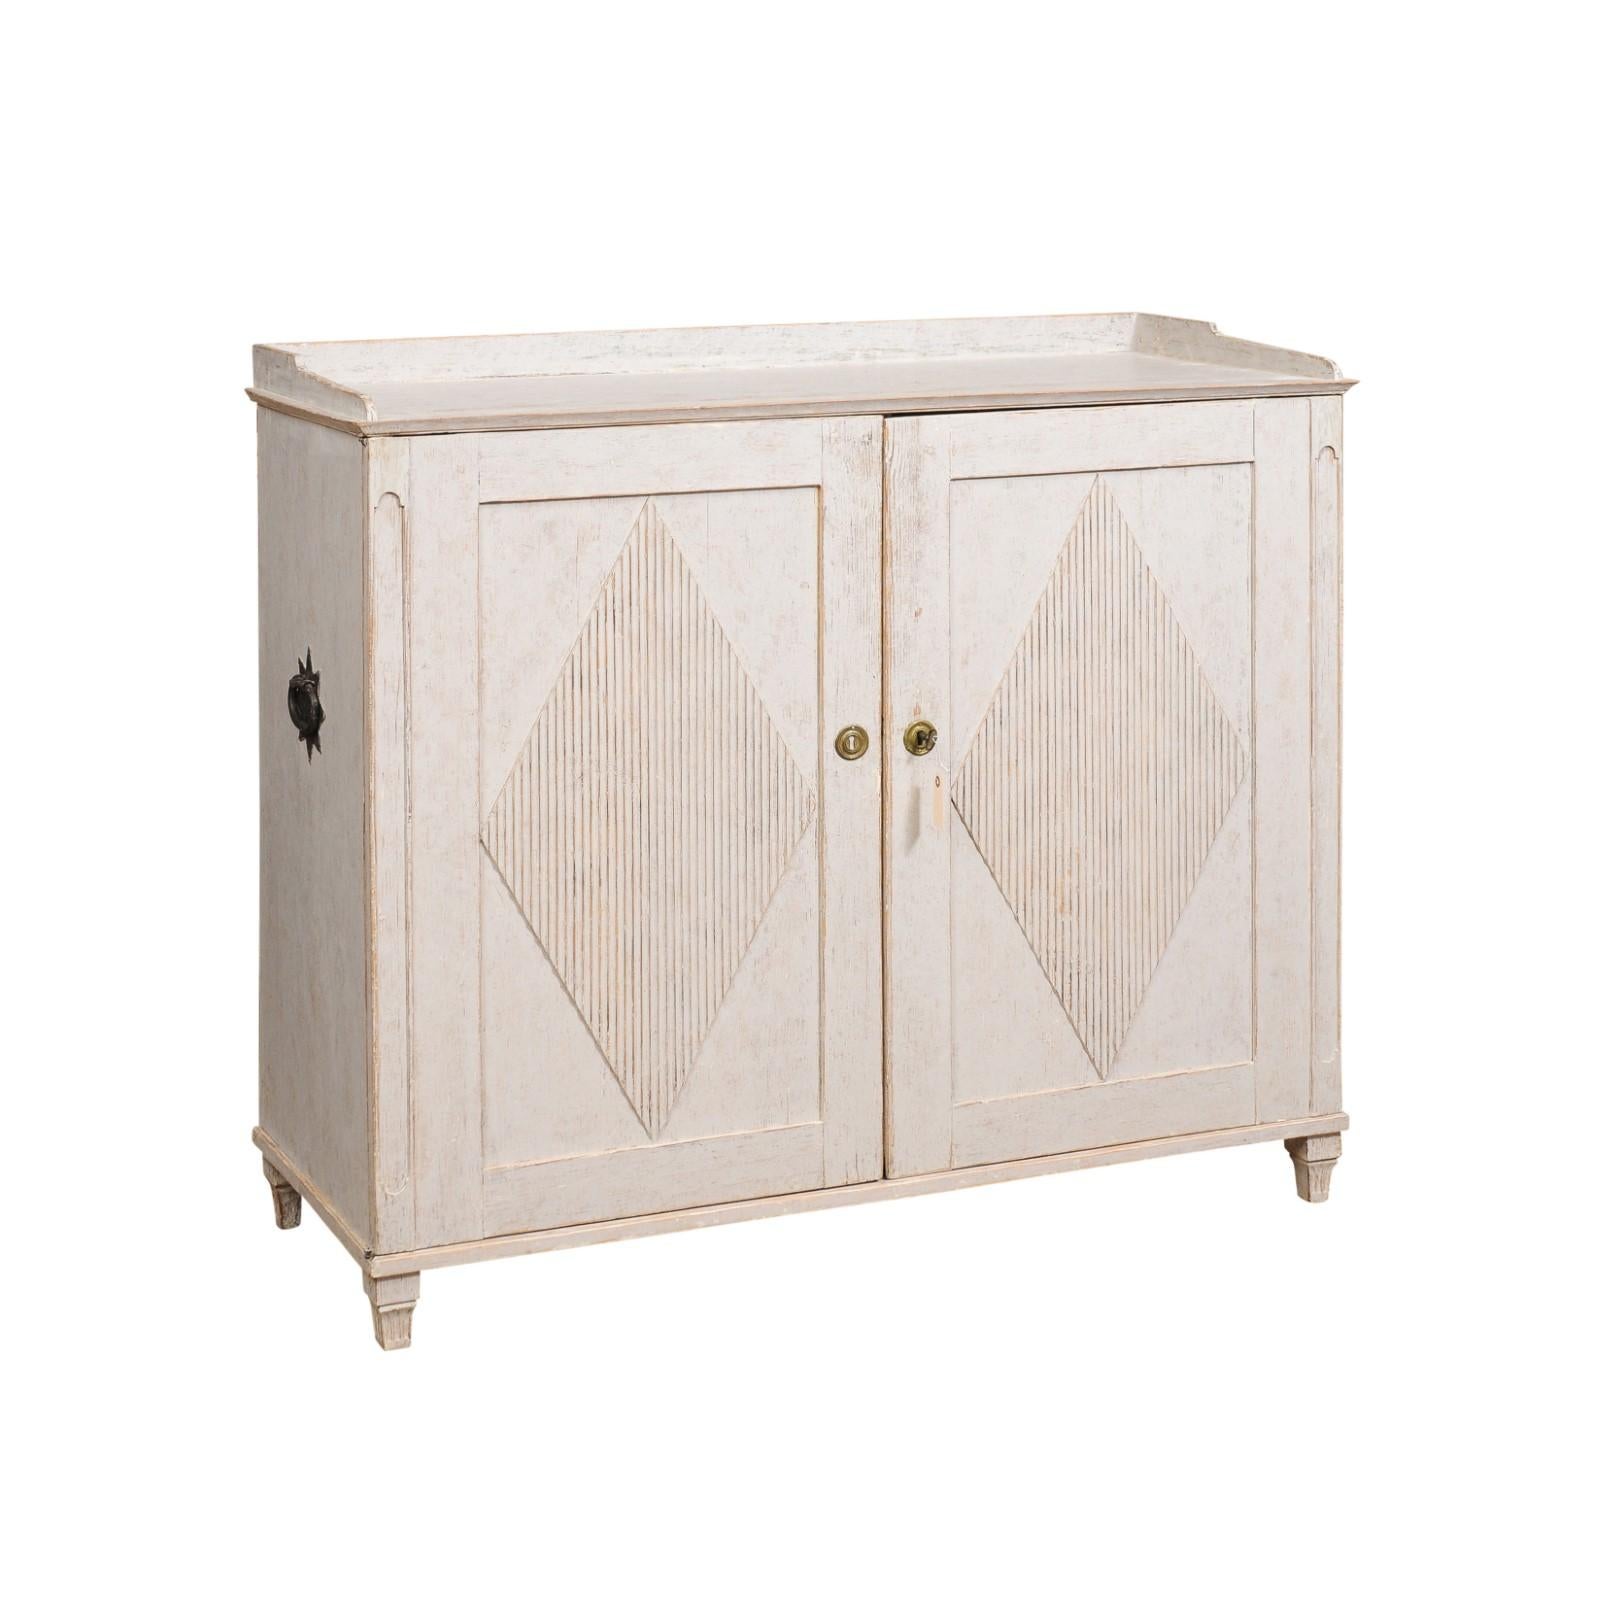 A Swedish Gustavian period painted wood sideboard from the early 19th century with carved diamond motifs. This Swedish Gustavian period sideboard, crafted in the first quarter of the 19th century, exudes the timeless elegance and refined simplicity